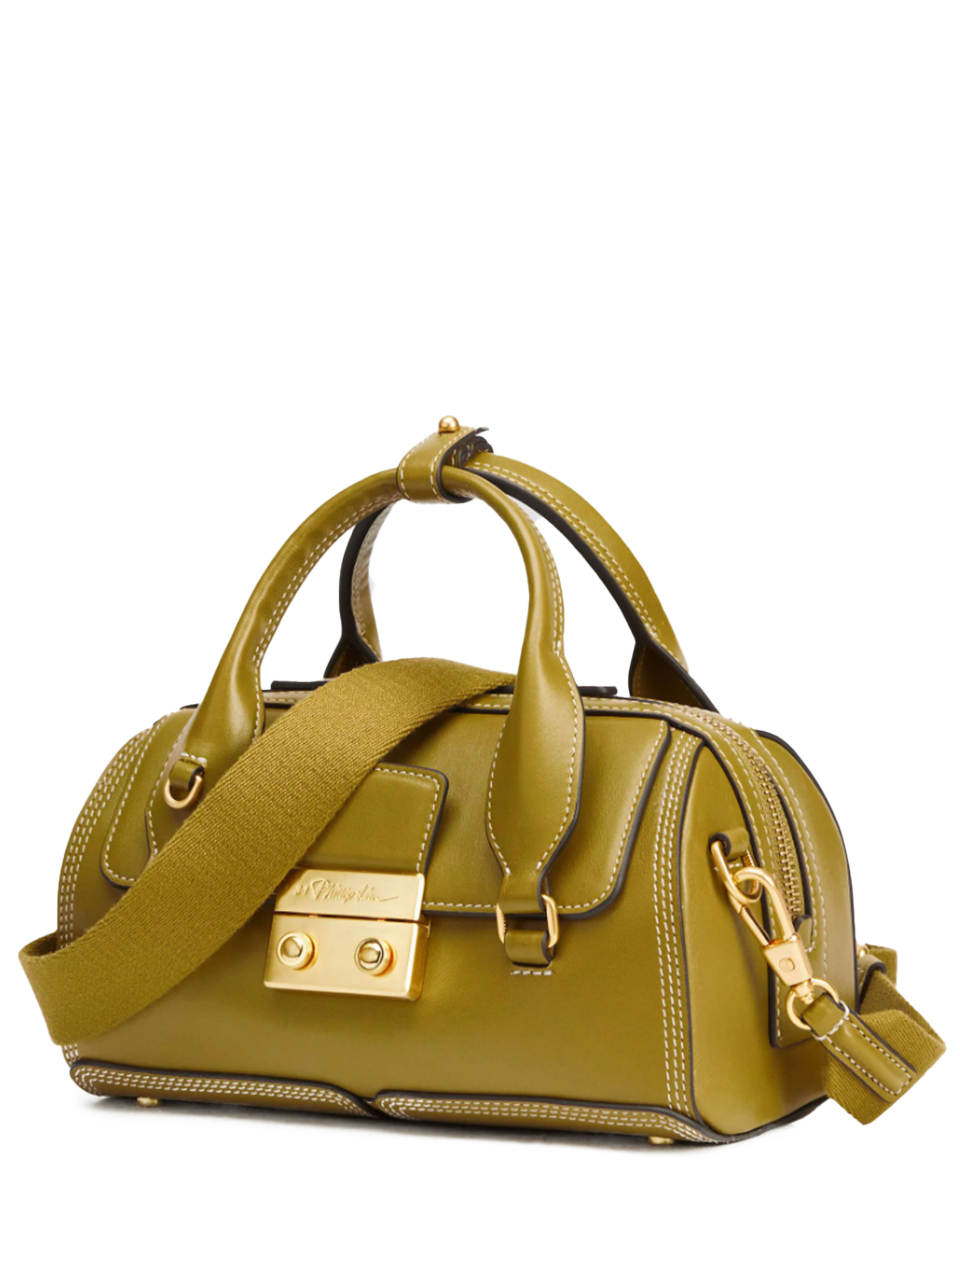 3.1 PHILLIP LIM Pashli Duffle in Toffee 3/4 View 